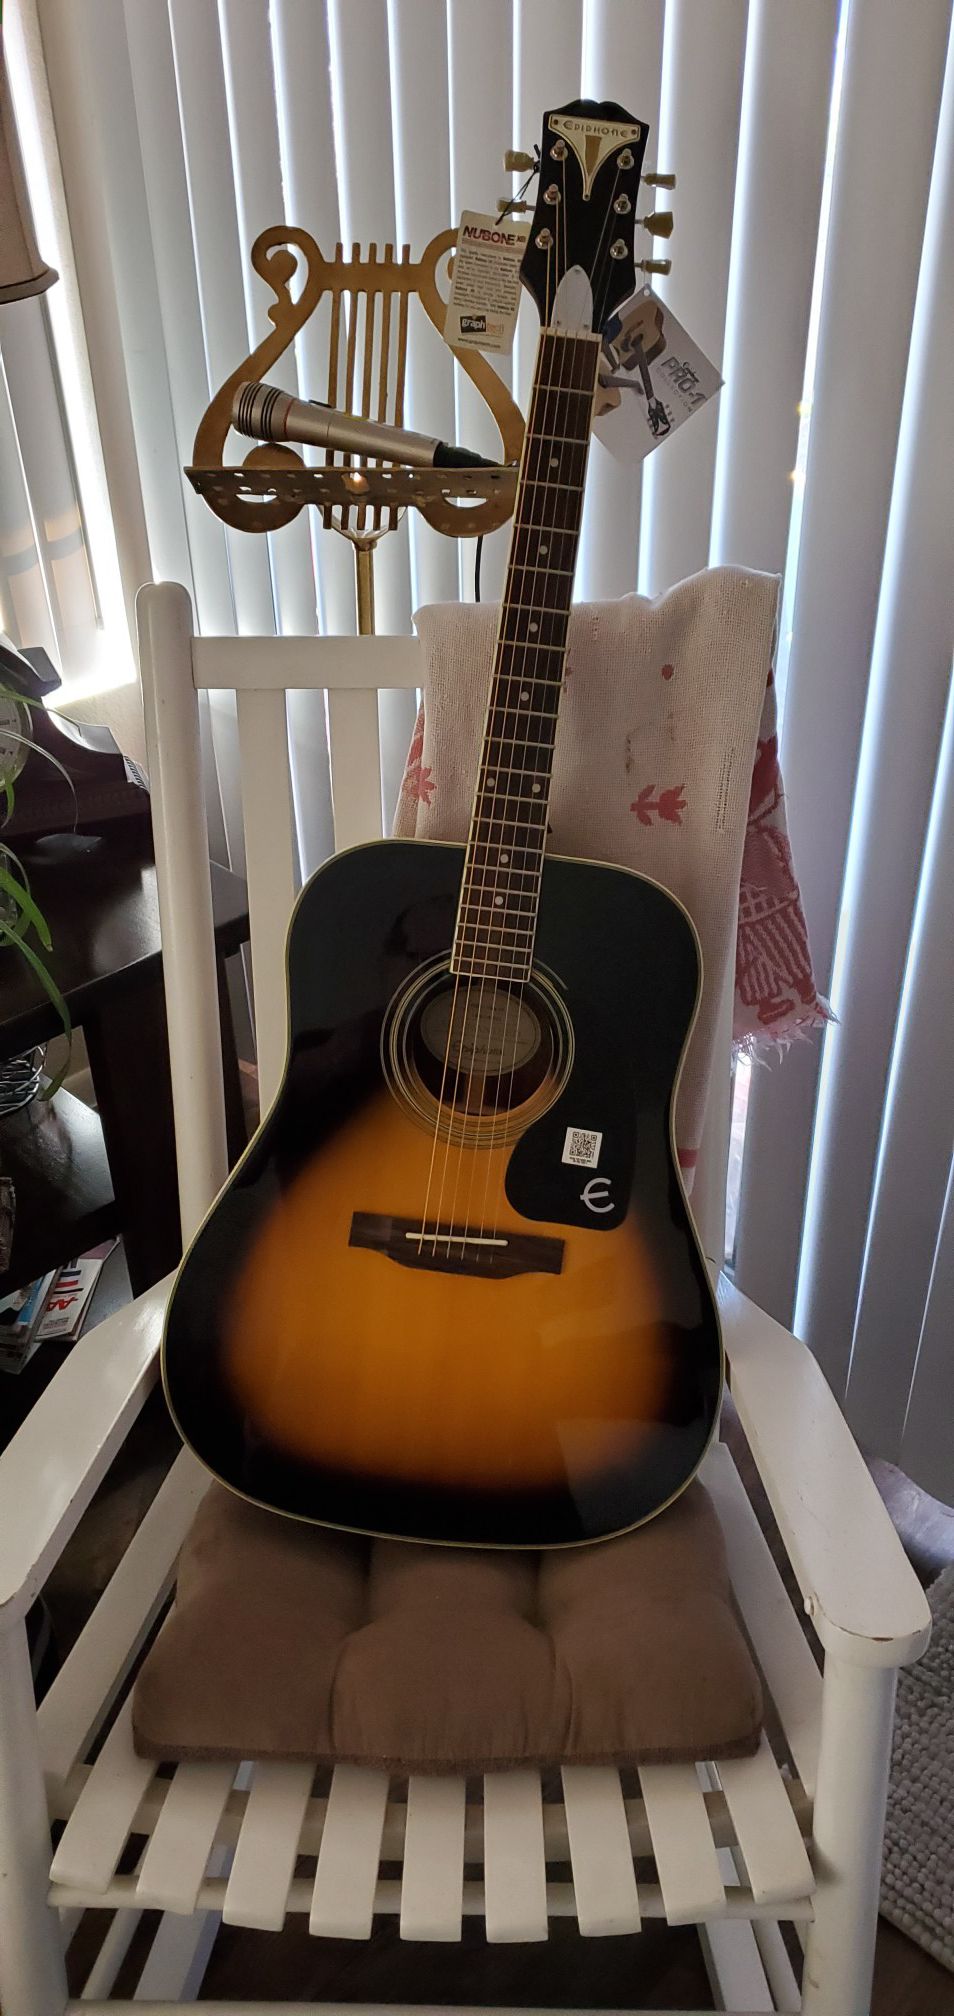 Brand new epiphone acoustic guitar!!